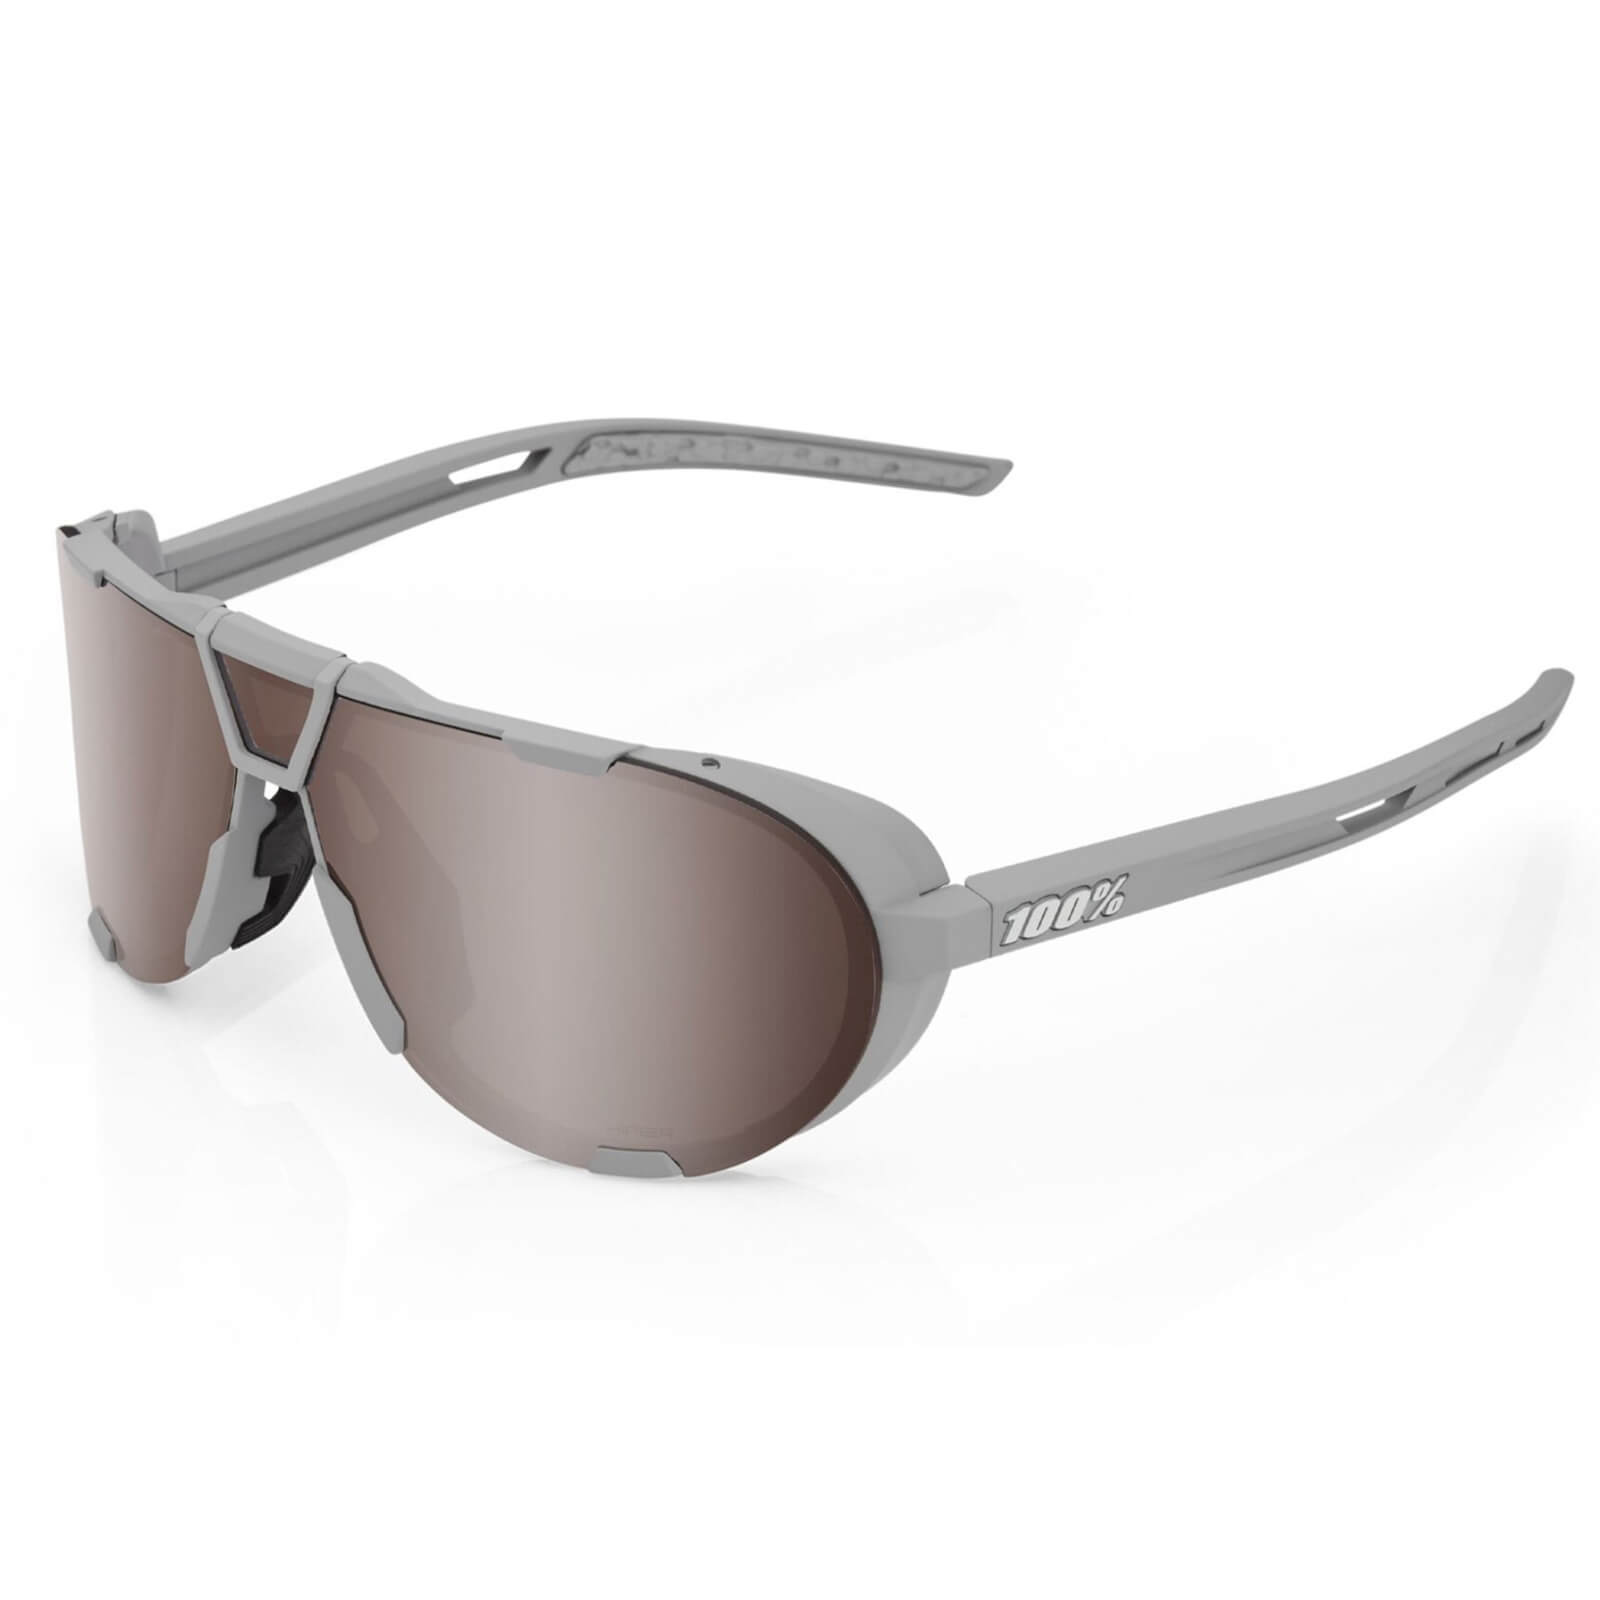 100% Westcraft Sunglasses with HiPER Mirror Lens -Soft Tact/Cool Grey/Silver